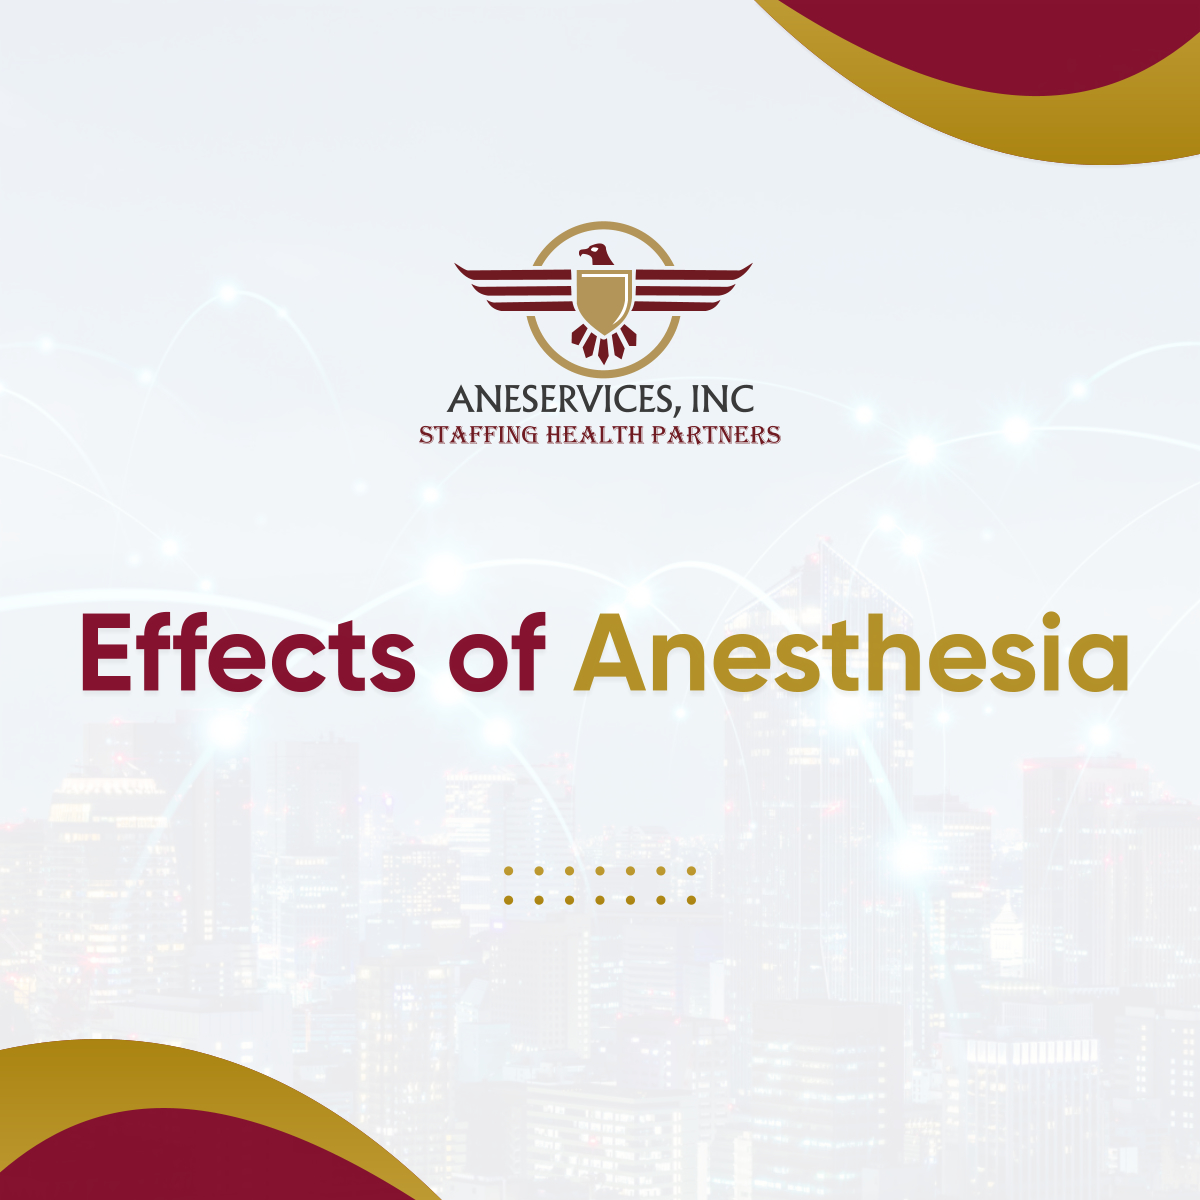 The effects of anesthesia can vary depending on the type used. Some of its usual outcomes may include: - Loss of sensation - Loss of consciousness - Changes in blood pressure and heart rate #HealthcareStaffing #HealthcareConsulting #Anesthesia #ColumbusGA #AnesthesiaEffects